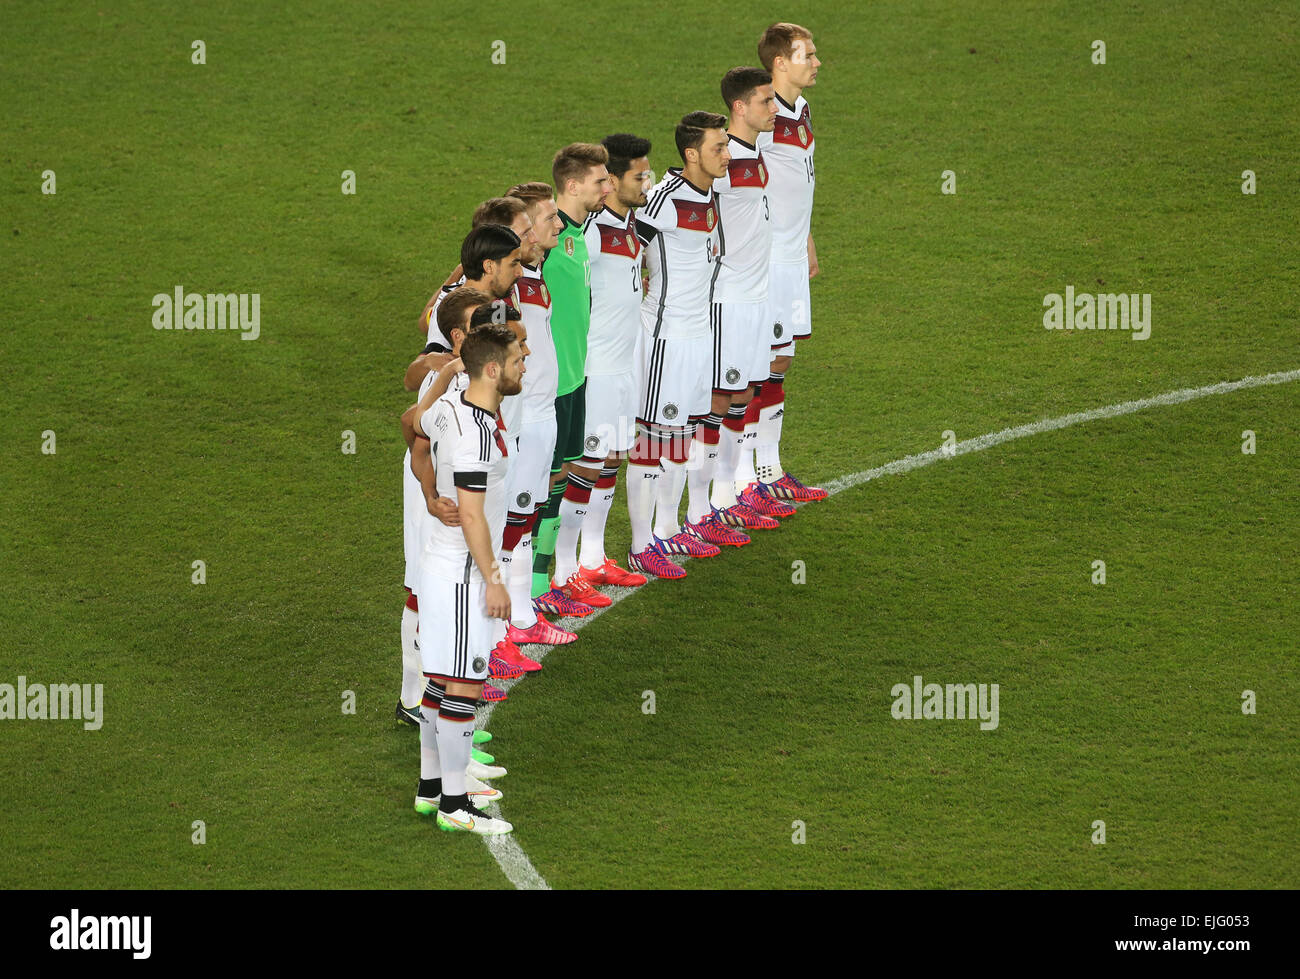 Kaiserslautern, Germany. 25th Mar, 2015. Germany's Shkodran Mustafi (l-r), Karim Bellarabi, Mario Goetze, Sami Khedira, Benedikt Hoewedes, Marco Reus, Torwart Ron-Robert Zieler, Ilkay Gundogan, Mesut Ozil, Jonas Hector and Holger Badstuber stand together for a minutes silence prior to the international friendly Germany vs Australia in Kaiserslautern, Germany, 25 March 2015. The team commemorated the vicitimd of Germanwings flight 4U 9525, which crashed in the French Alps in southern France on 24 March 2015. Photo: Thomas Frey/dpa/Alamy Live News Stock Photo